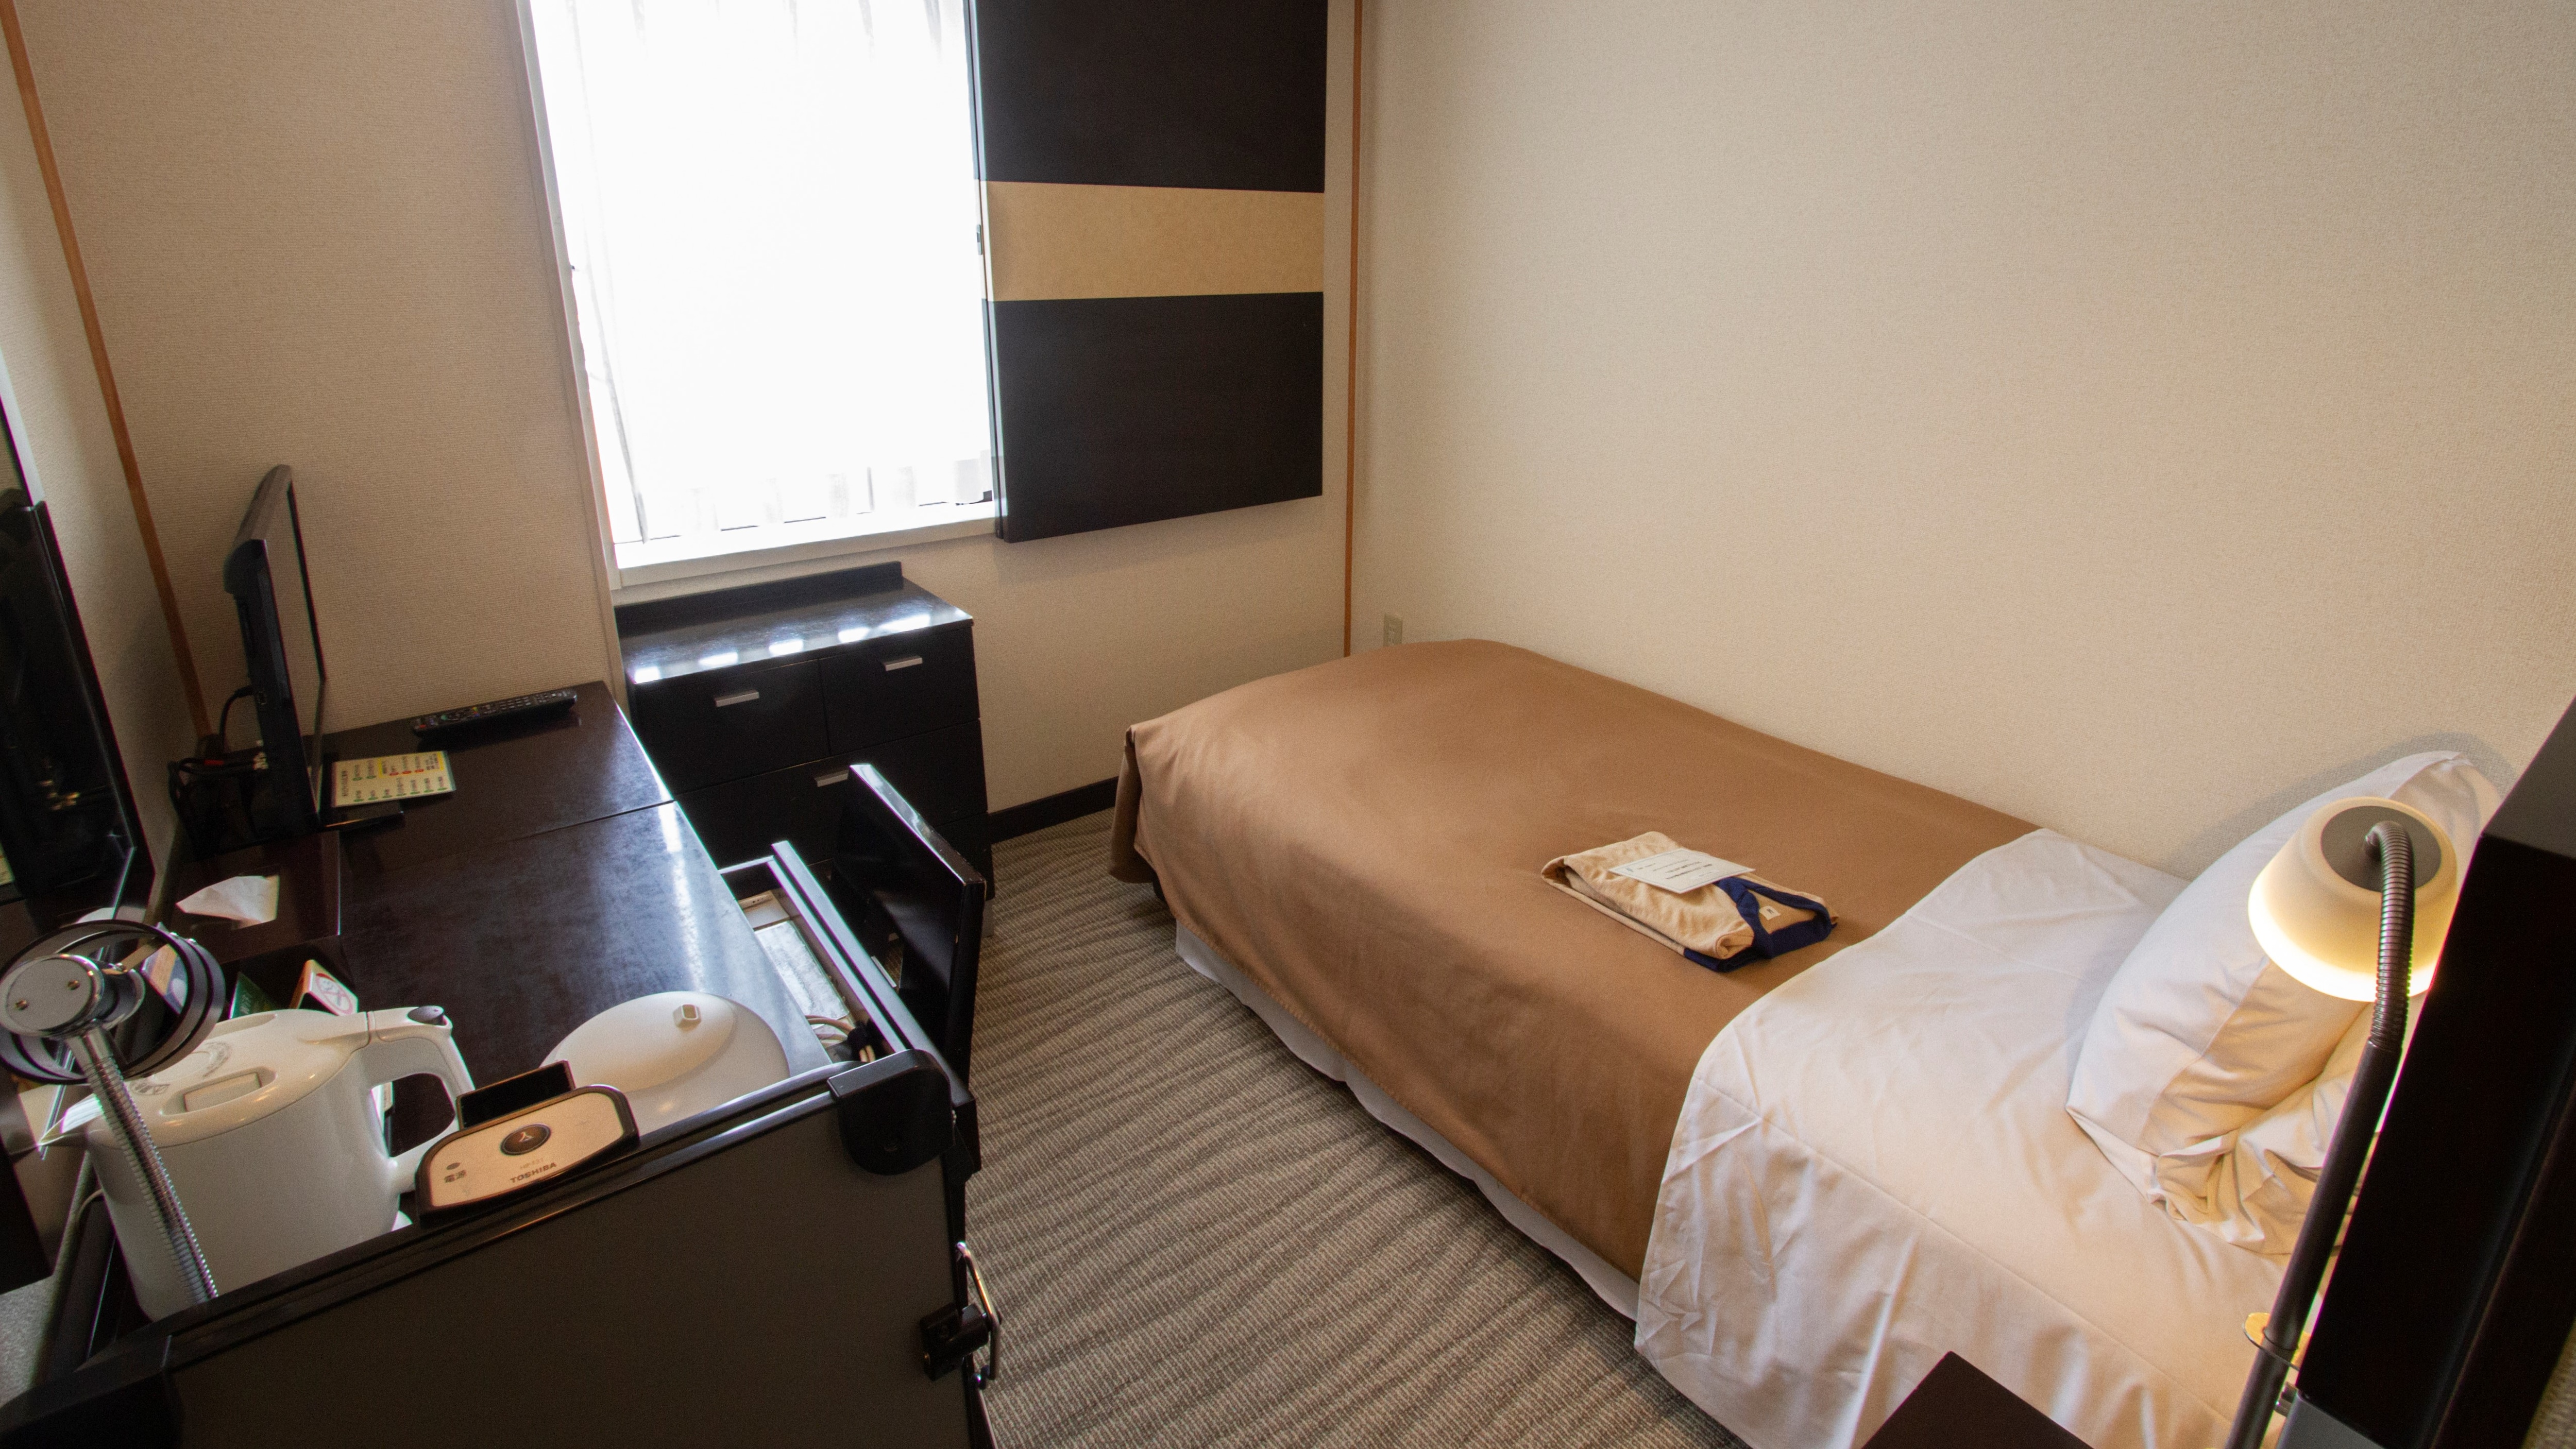 ◆ Single room / From 1 night to a short stay! It is a compact room with two types of pillows. (Example of guest room)